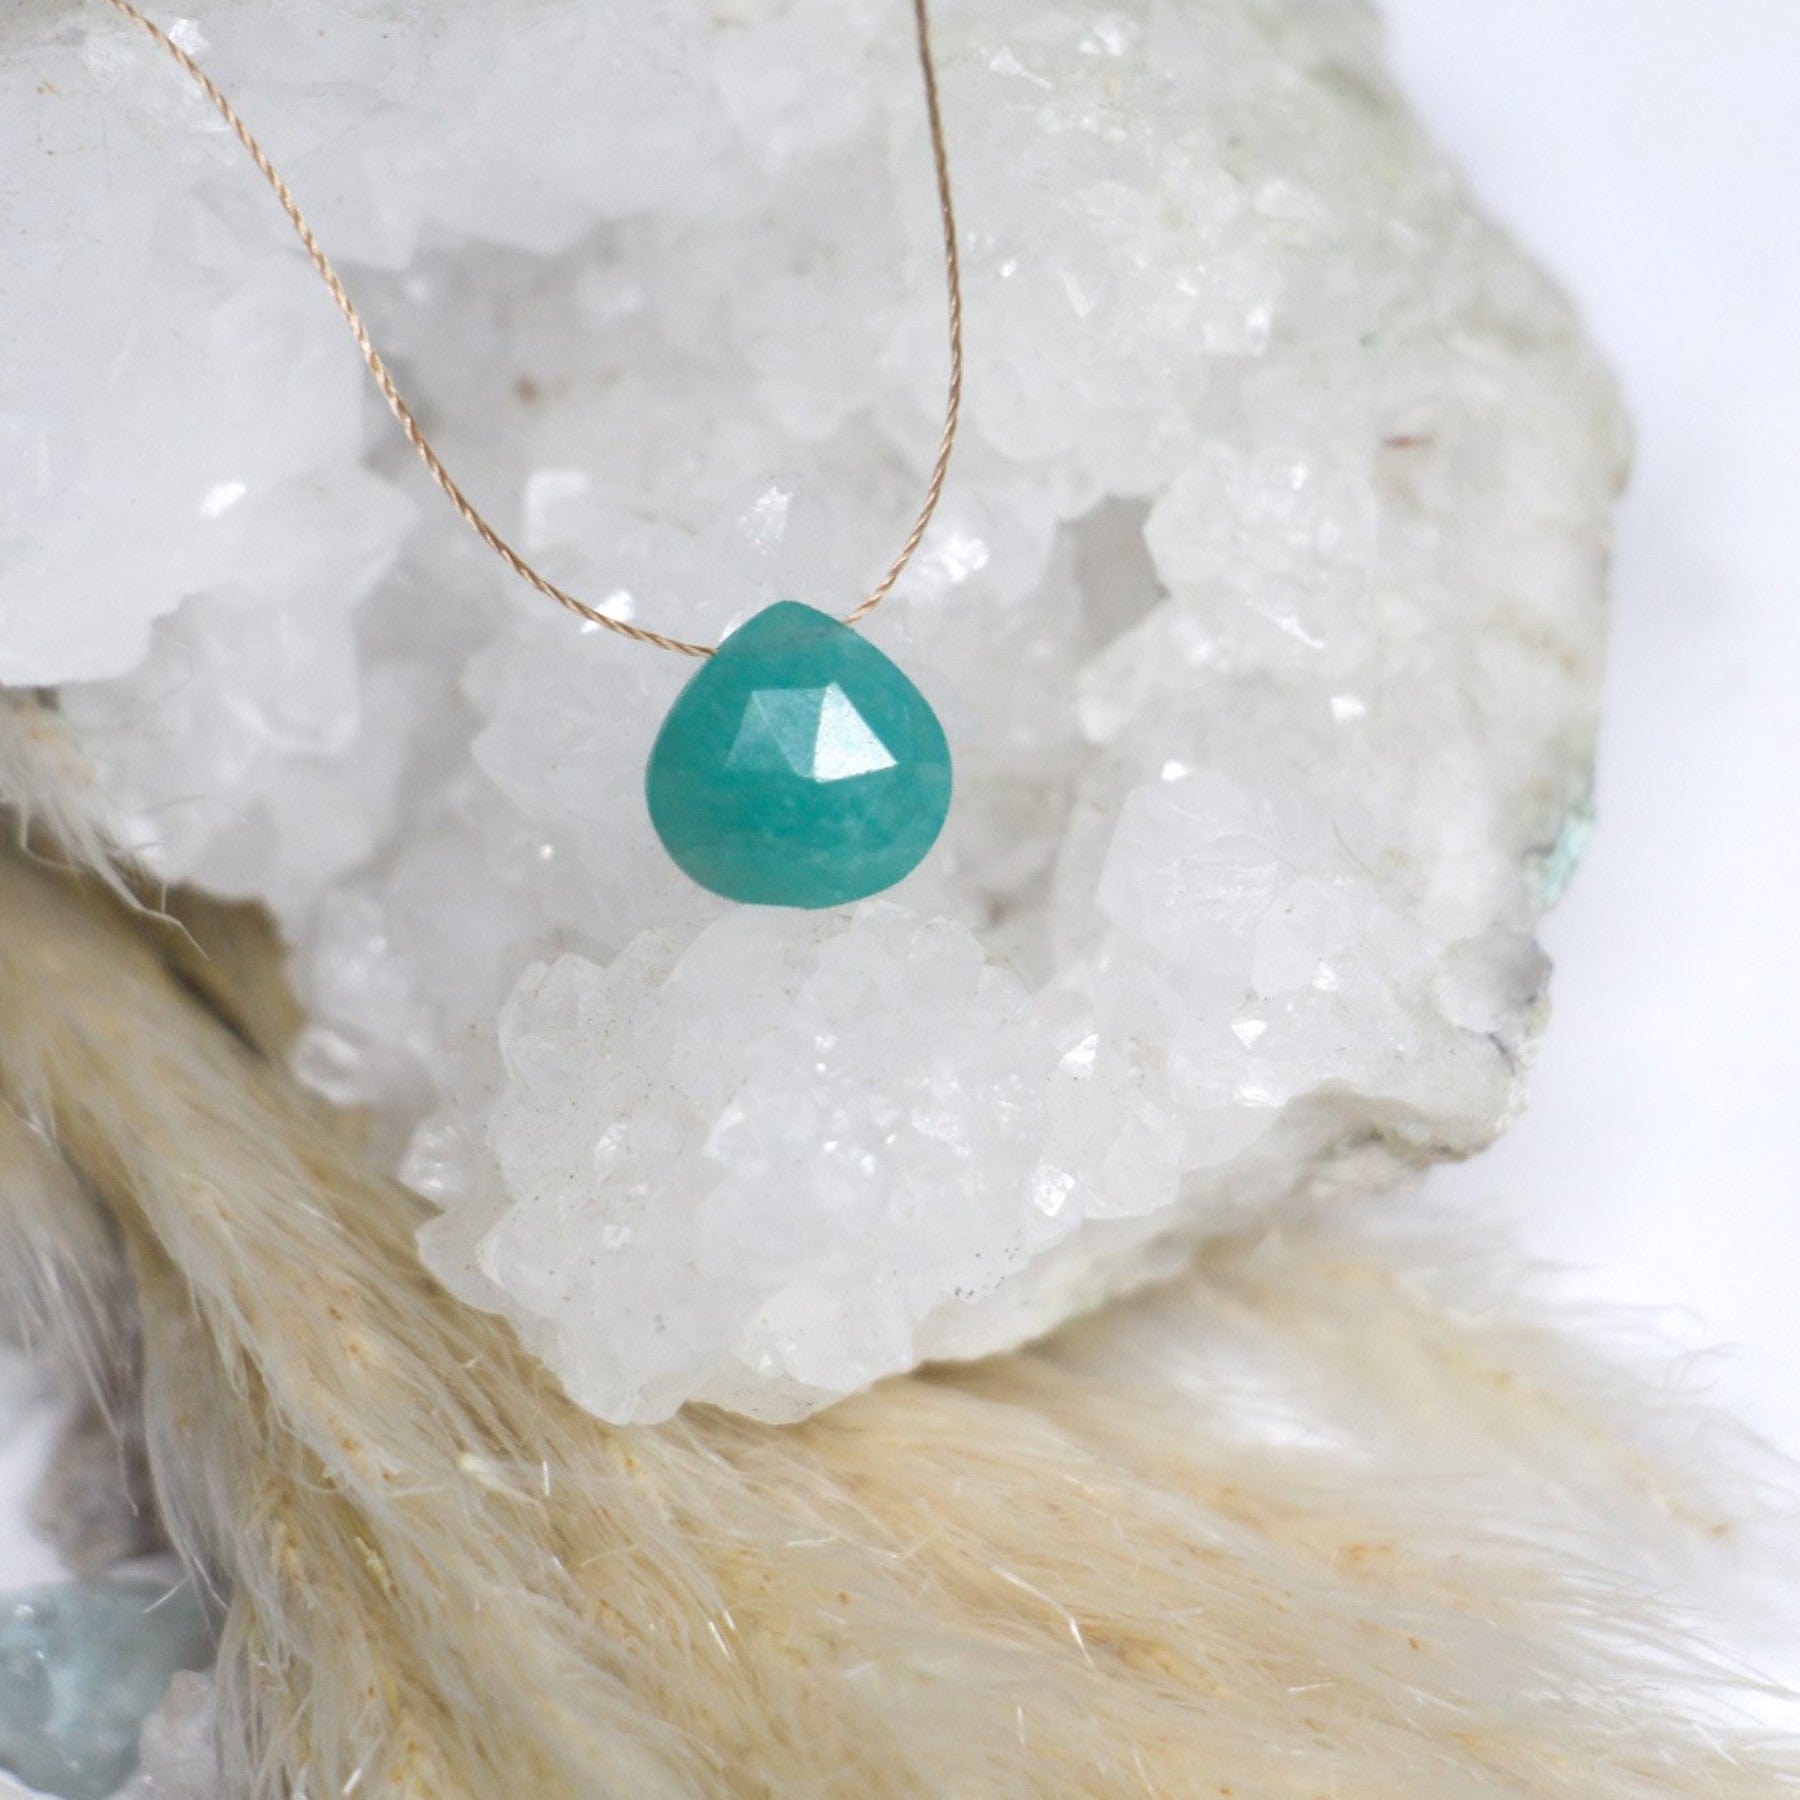 A teal faceted gemstone pendant on a delicate gold chain, displayed against a backdrop of white crystalline structures and soft fur textures.